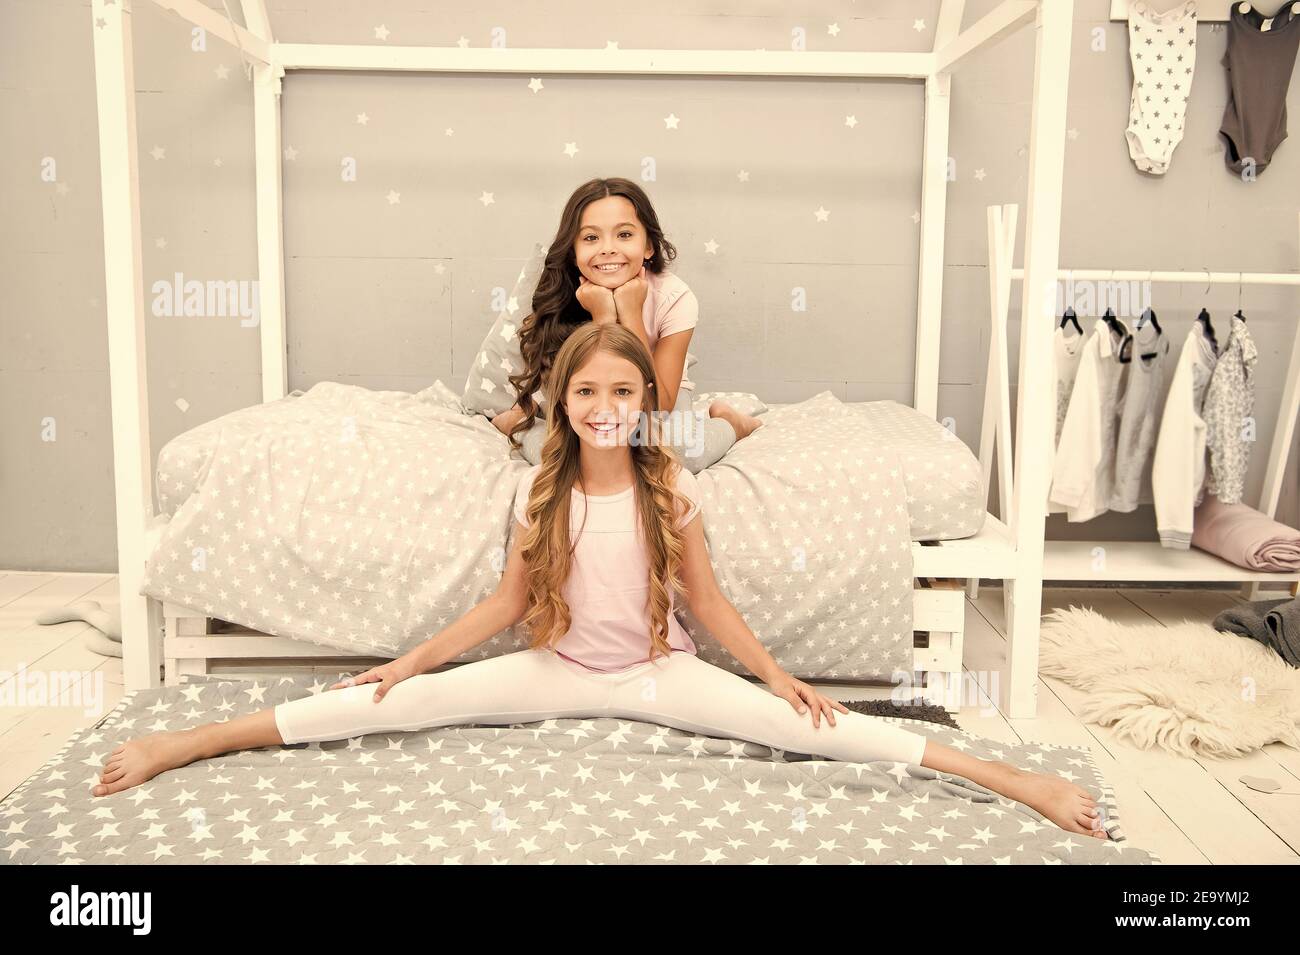 Stay at home. Small girls feel happy at home. Little children play in bedroom. Home clothing. Rest and relaxation. Bedtime routine. Leisure and lounge. Self isolation and quarantine. Lets stay home. Stock Photo